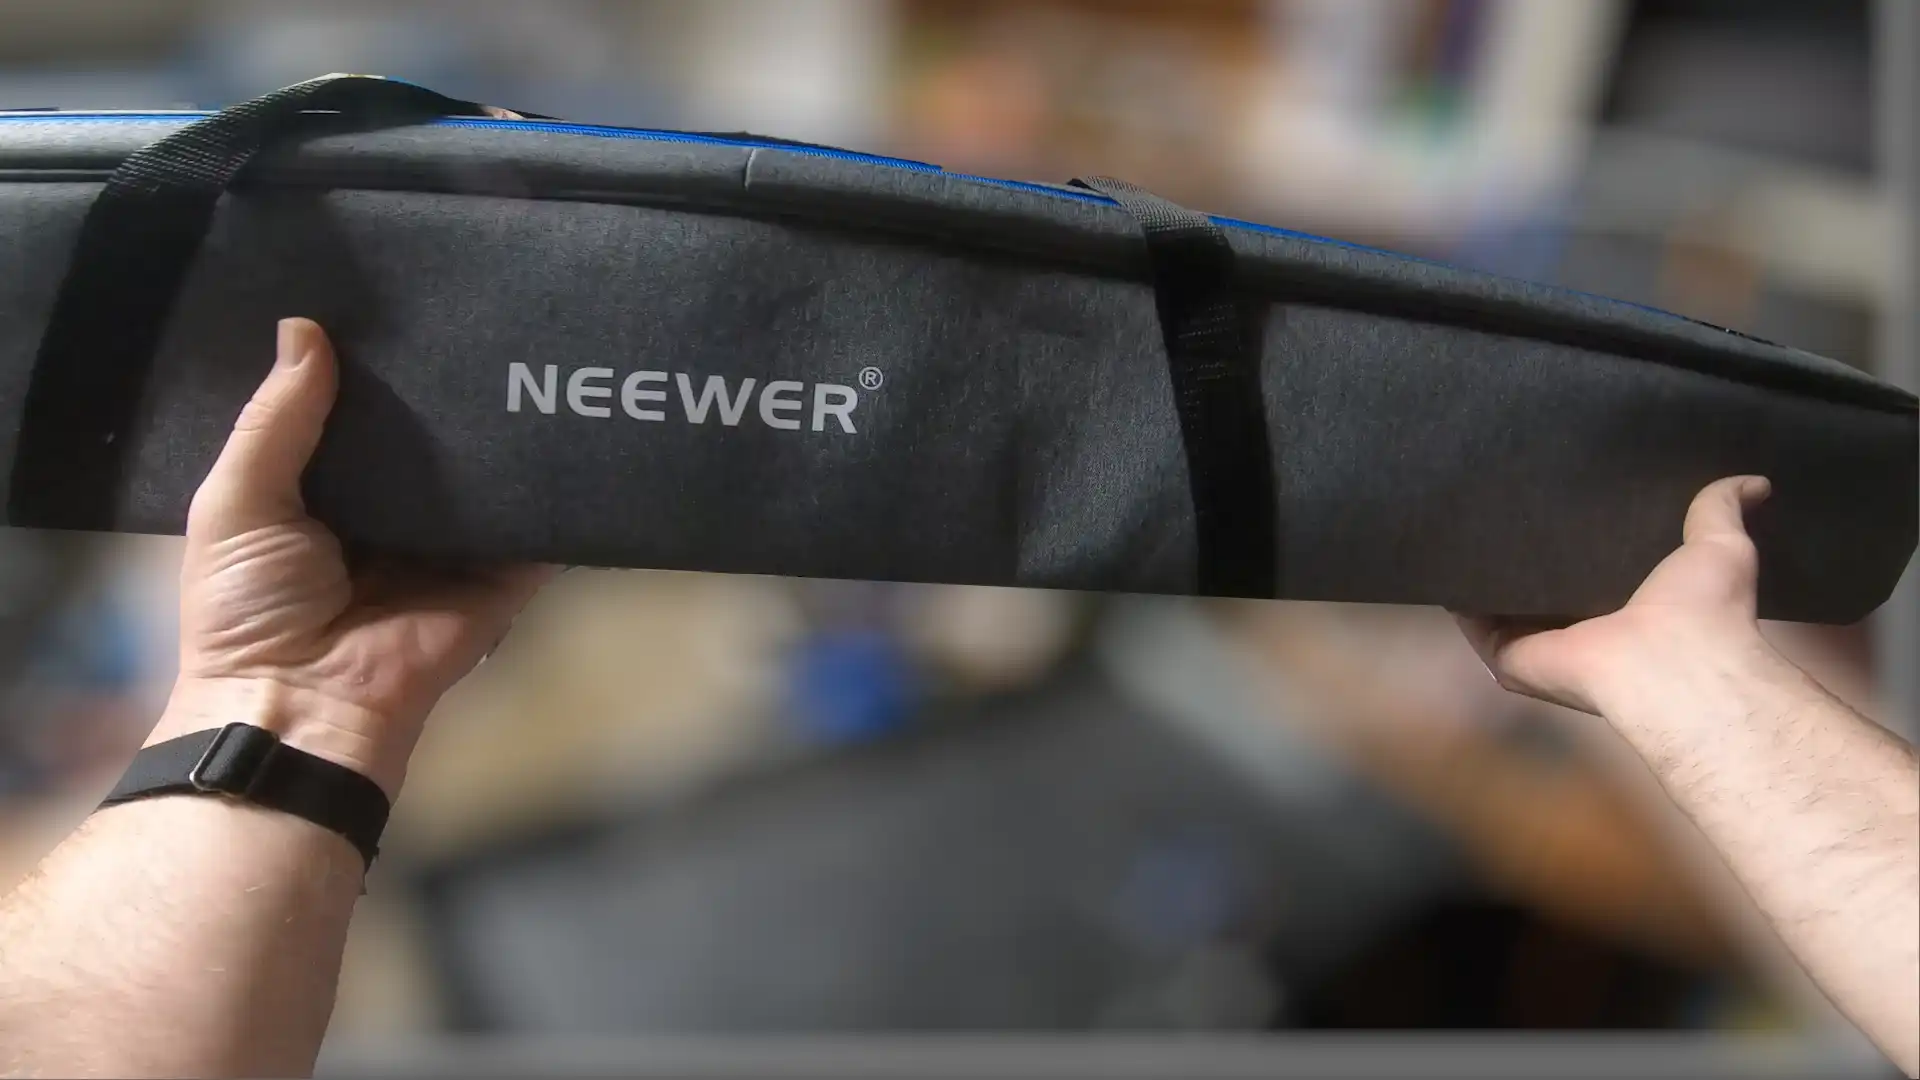 Person holding Neewer branded equipment case.